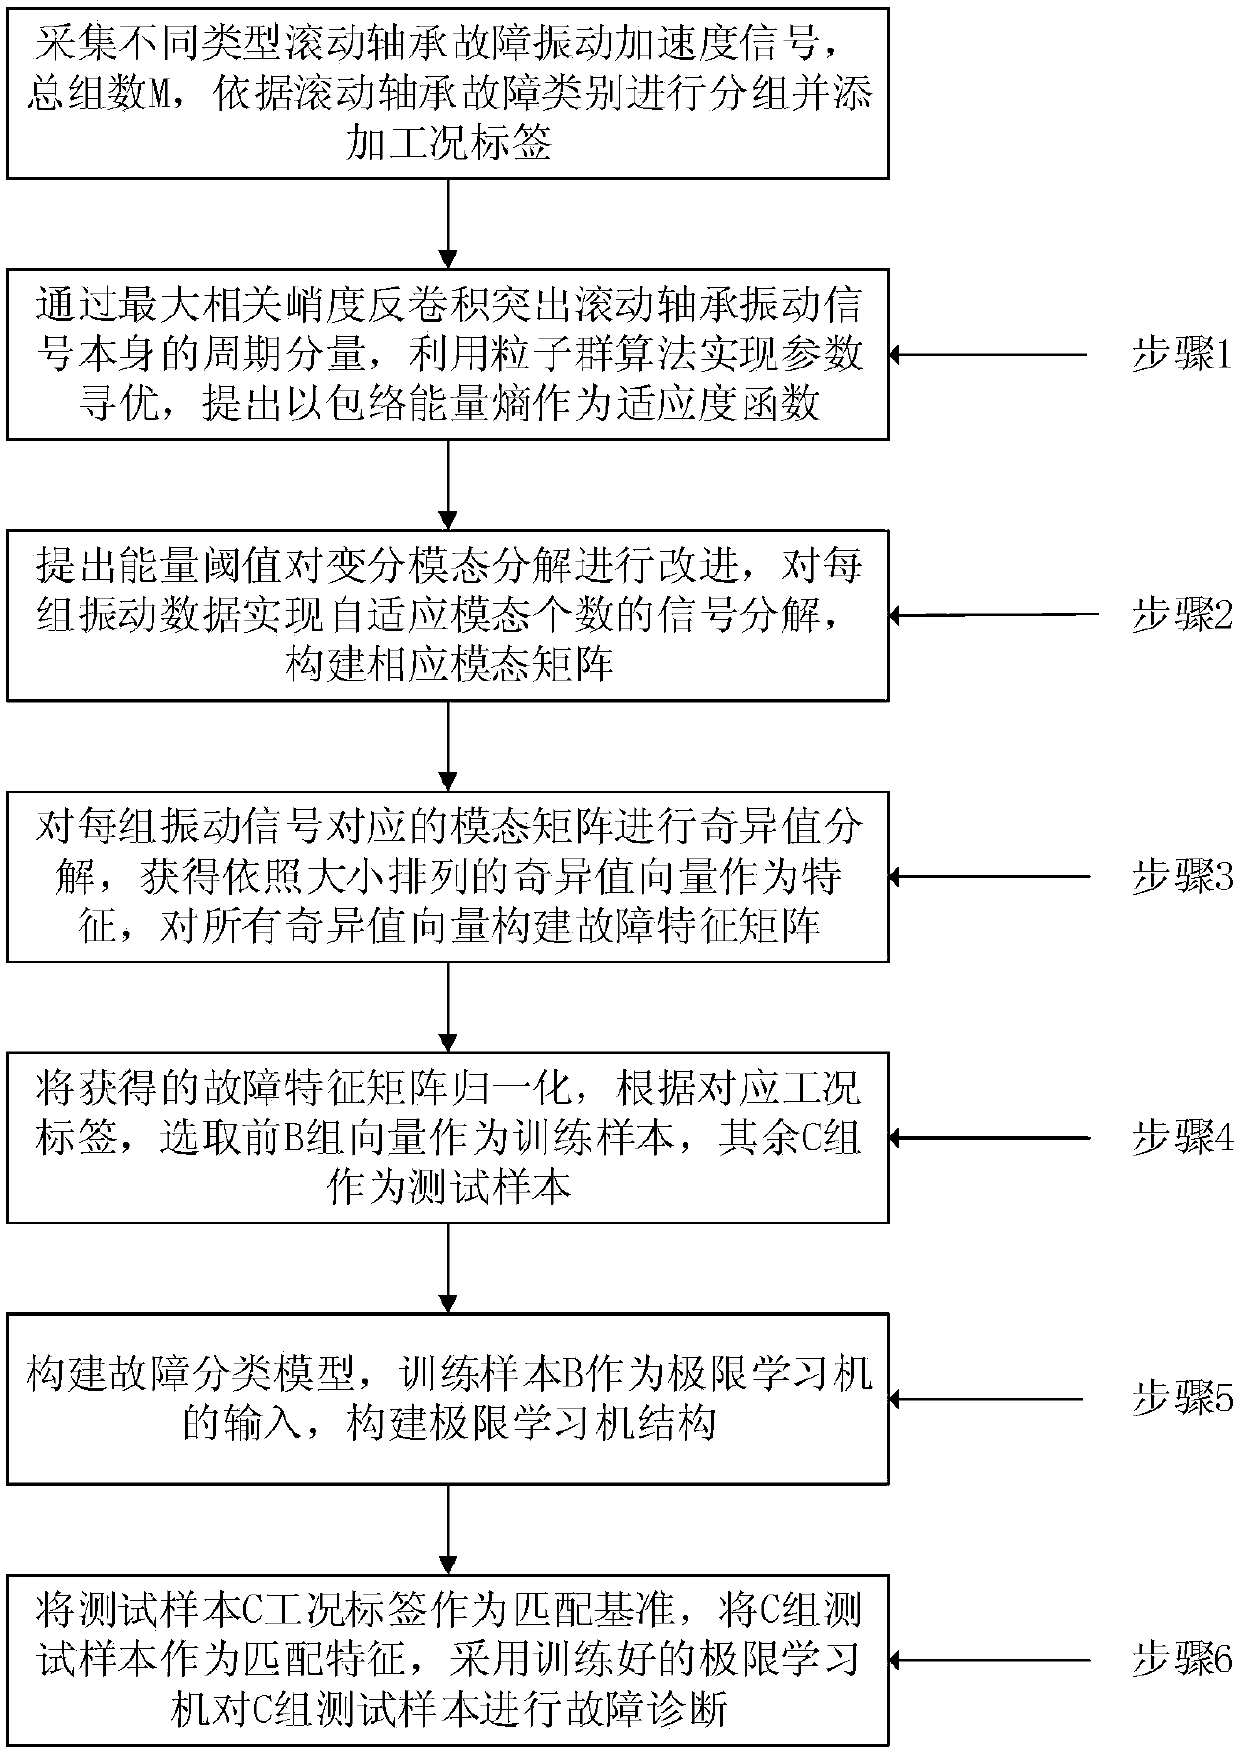 Rolling bearing fault diagnosis method based on improved variational model decomposition and extreme learning machine